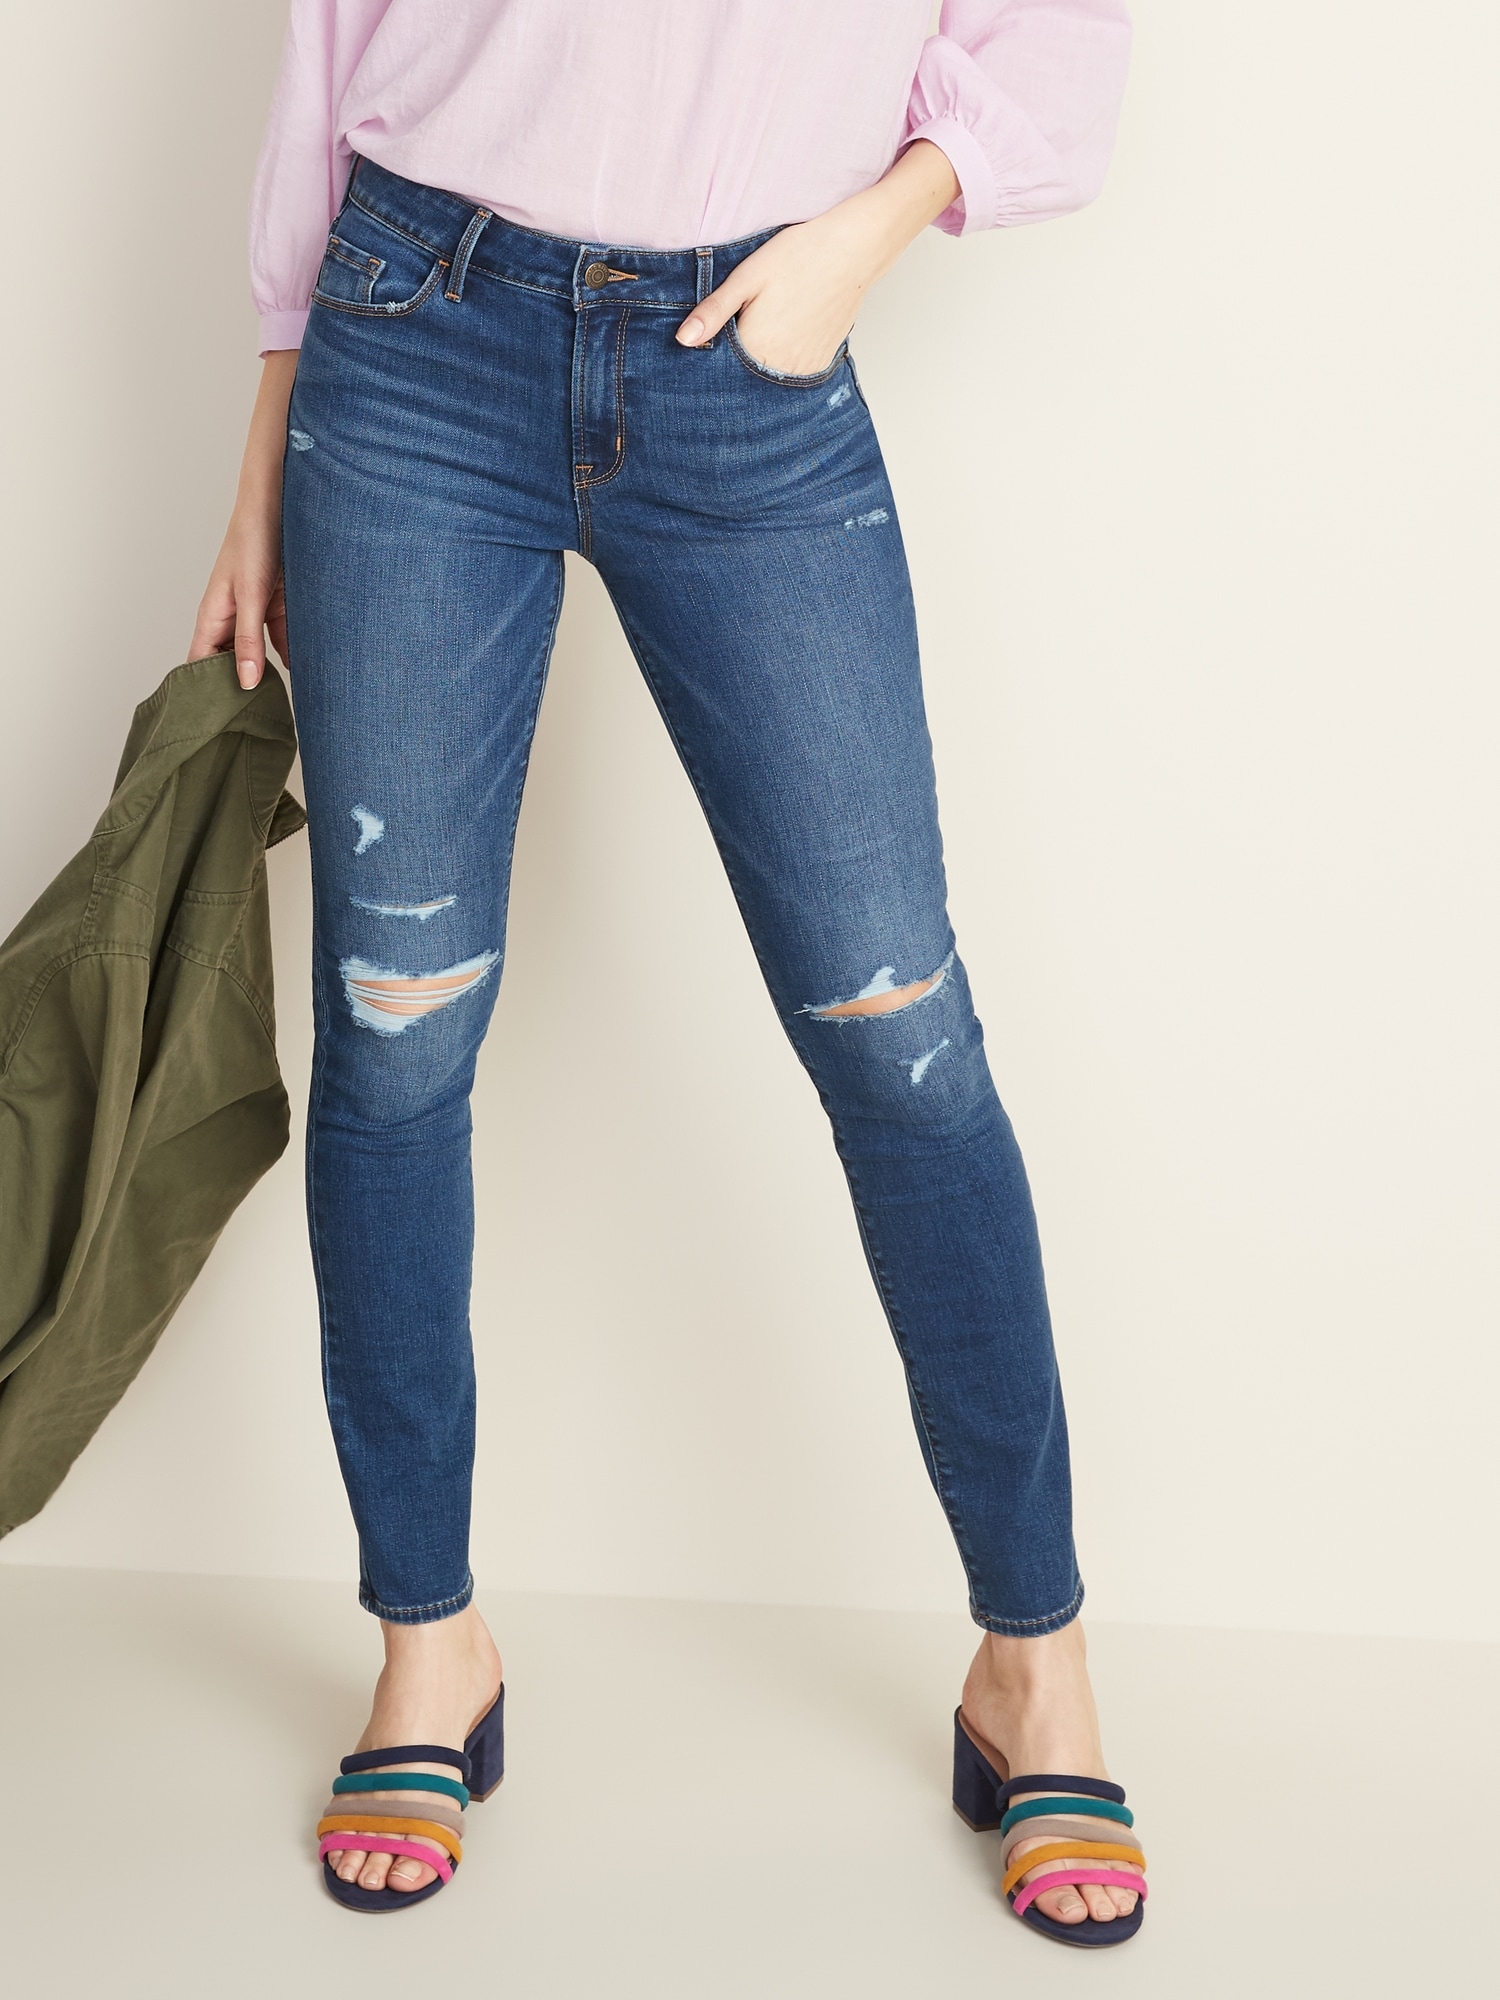 old navy mid rise curvy jeans